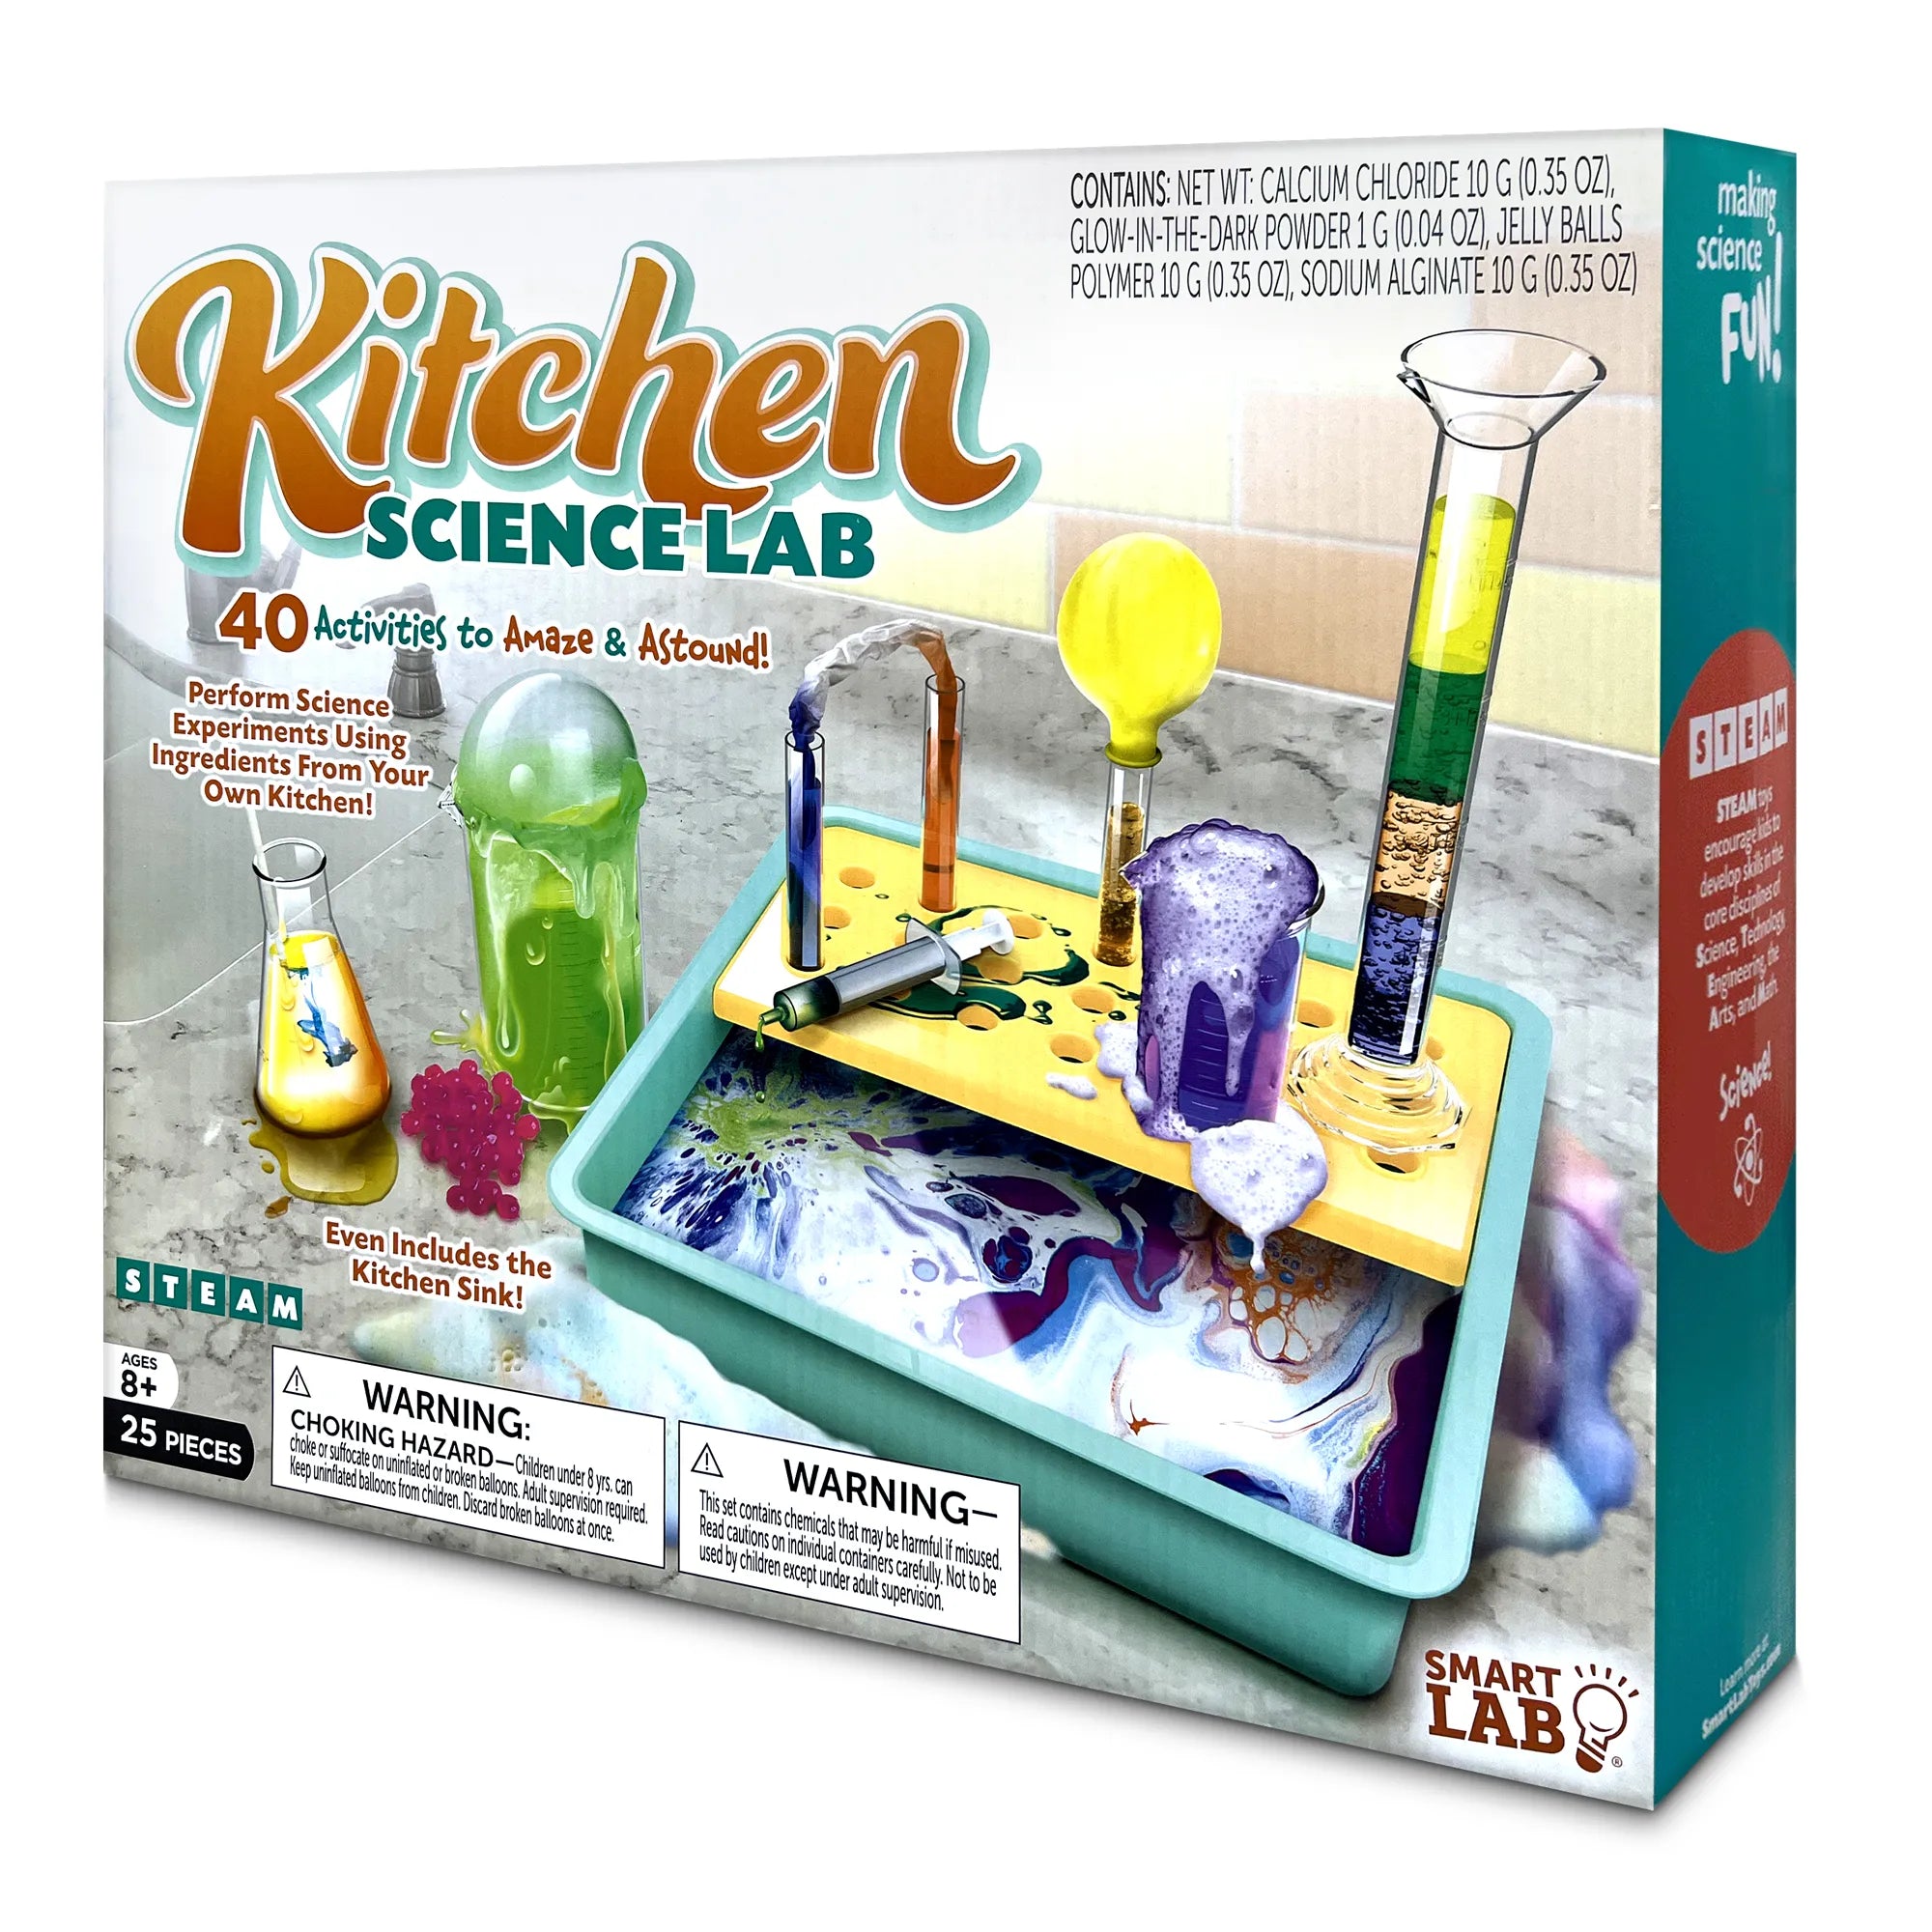 SmartLab Kitchen Science Lab - 40 Activities to Amaze & Astound! - Age 8+ - Brown's Hobby & Game